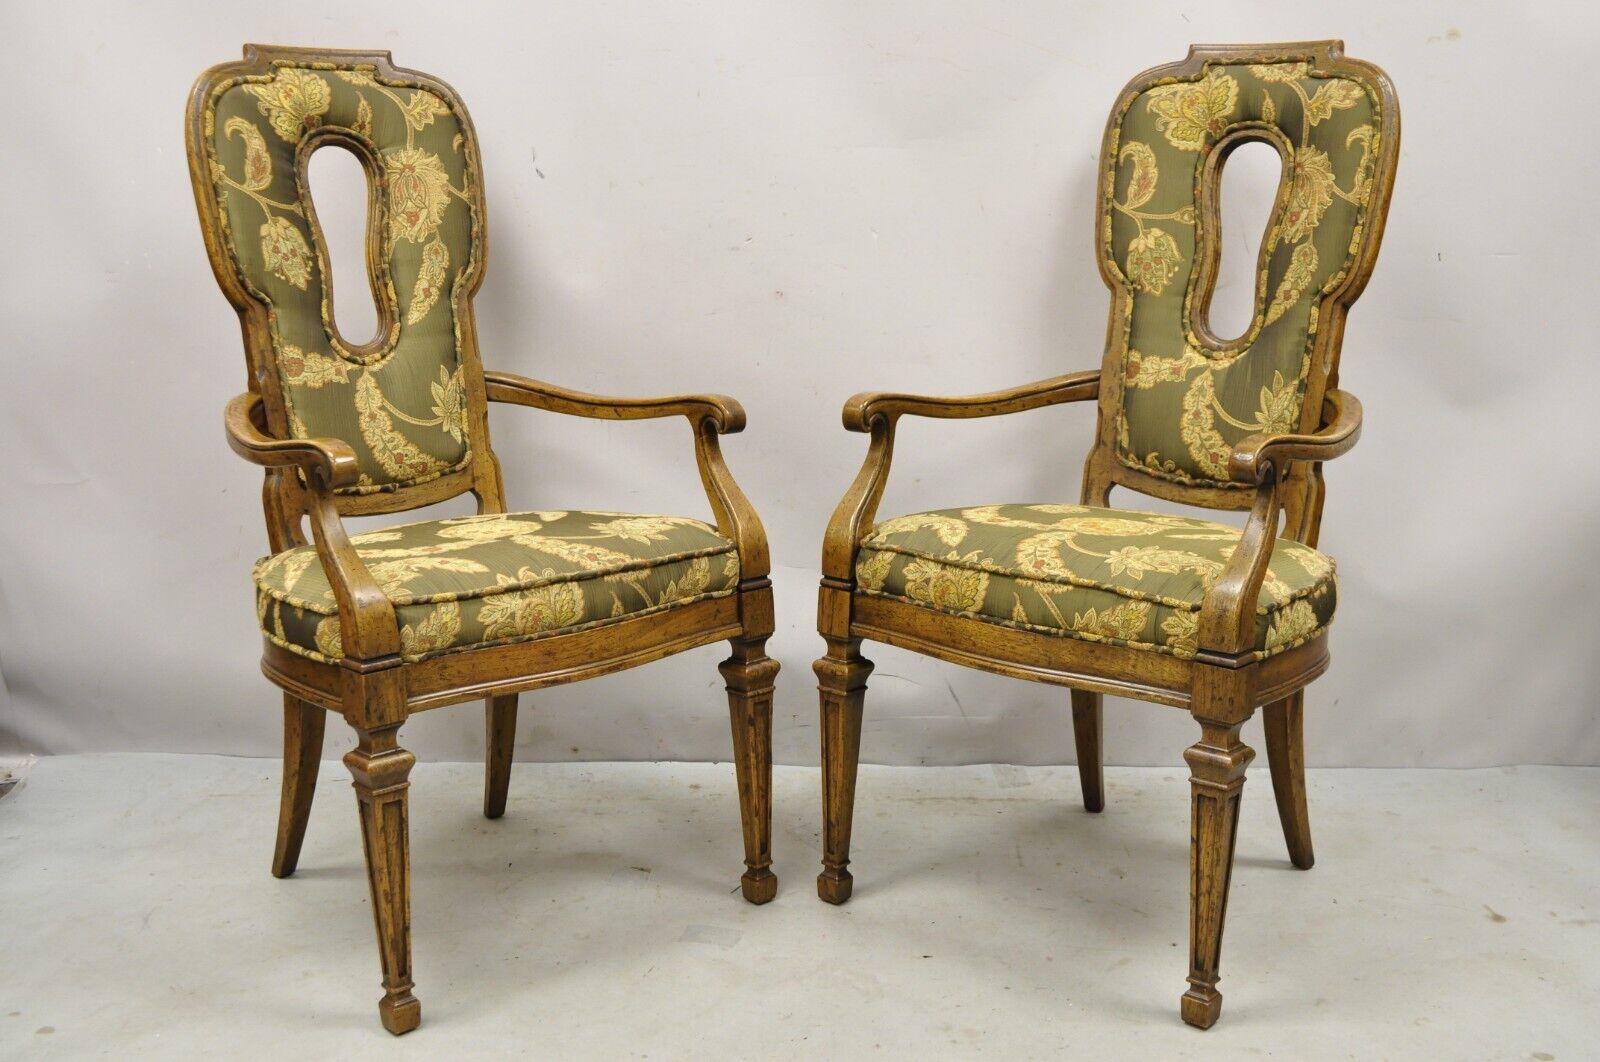 Vintage Hollywood Regency Keyhole Back Fireside Lounge Arm Chairs - a Pair For Sale 6